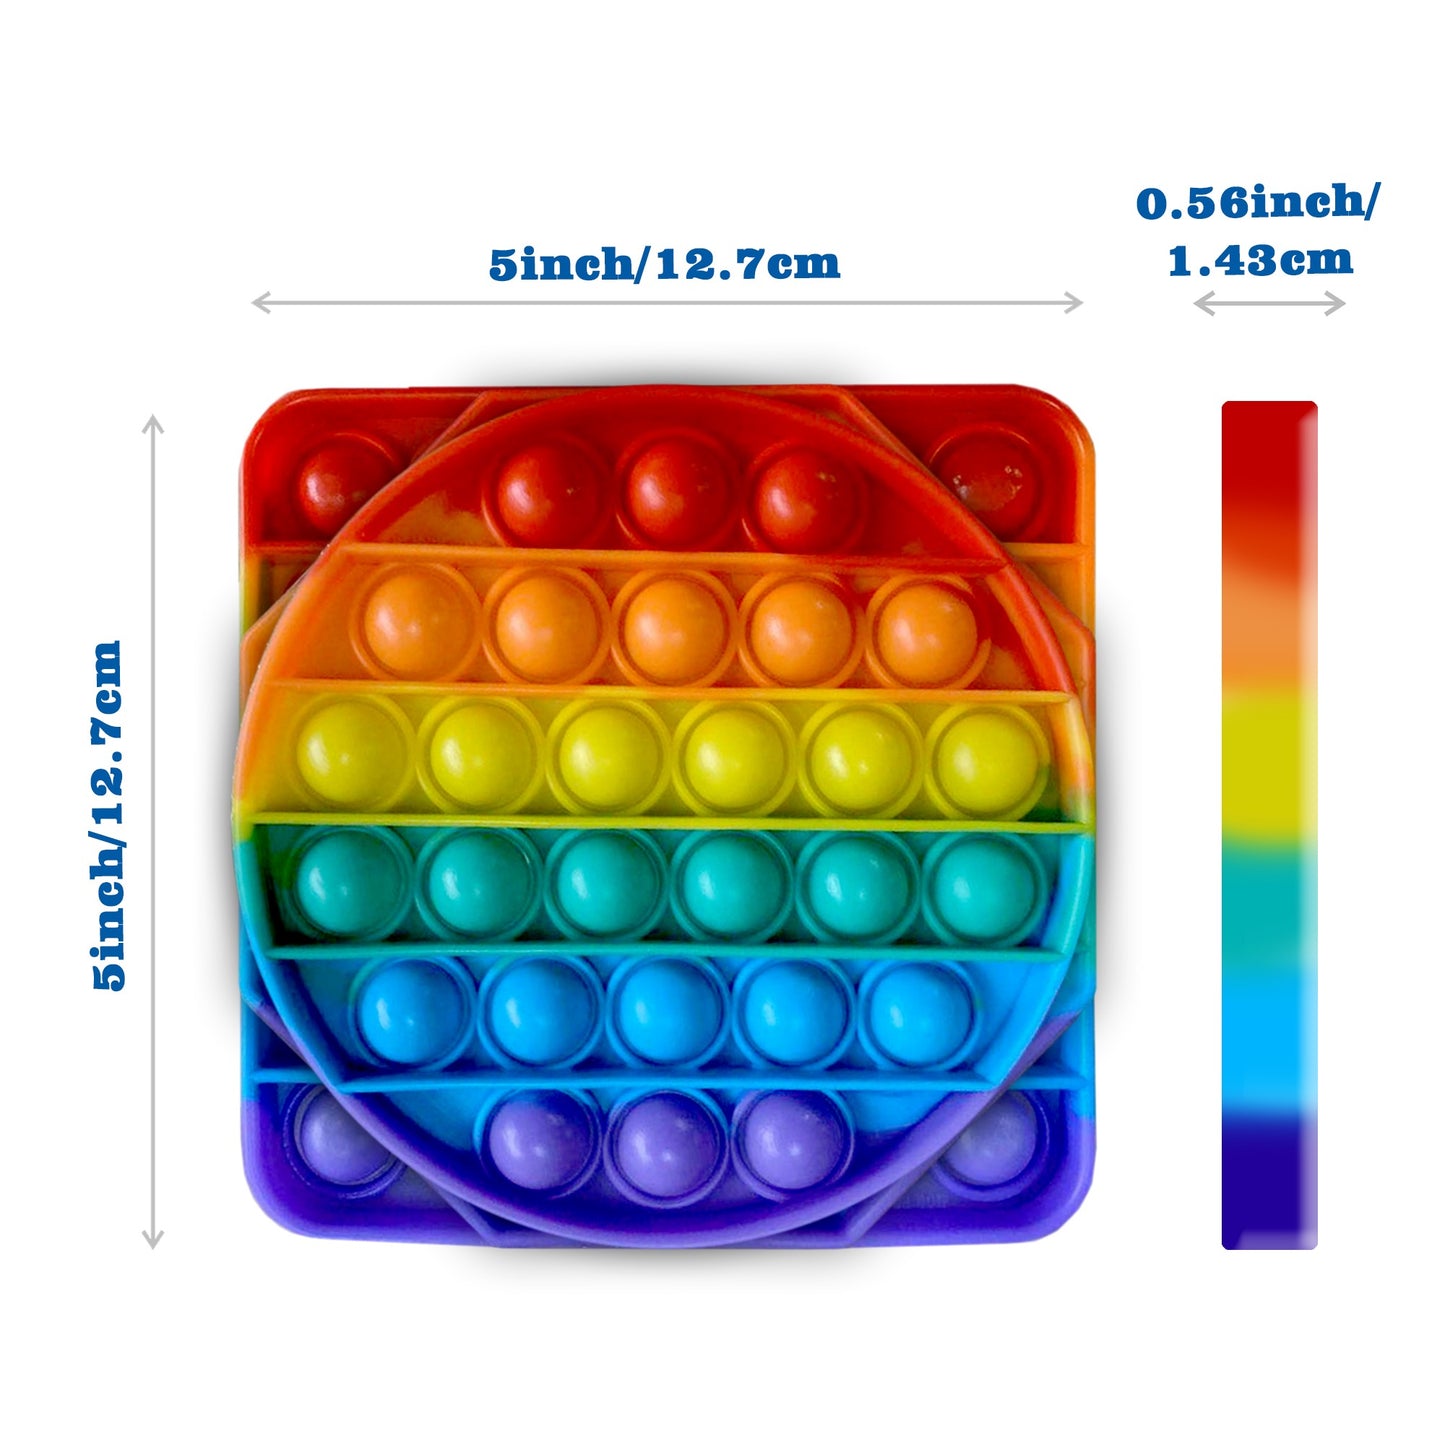 Infin-a-Pop 3 PACK: The Infinite Popping Toy and Game- Rainbow Circle, Square, & Octagon